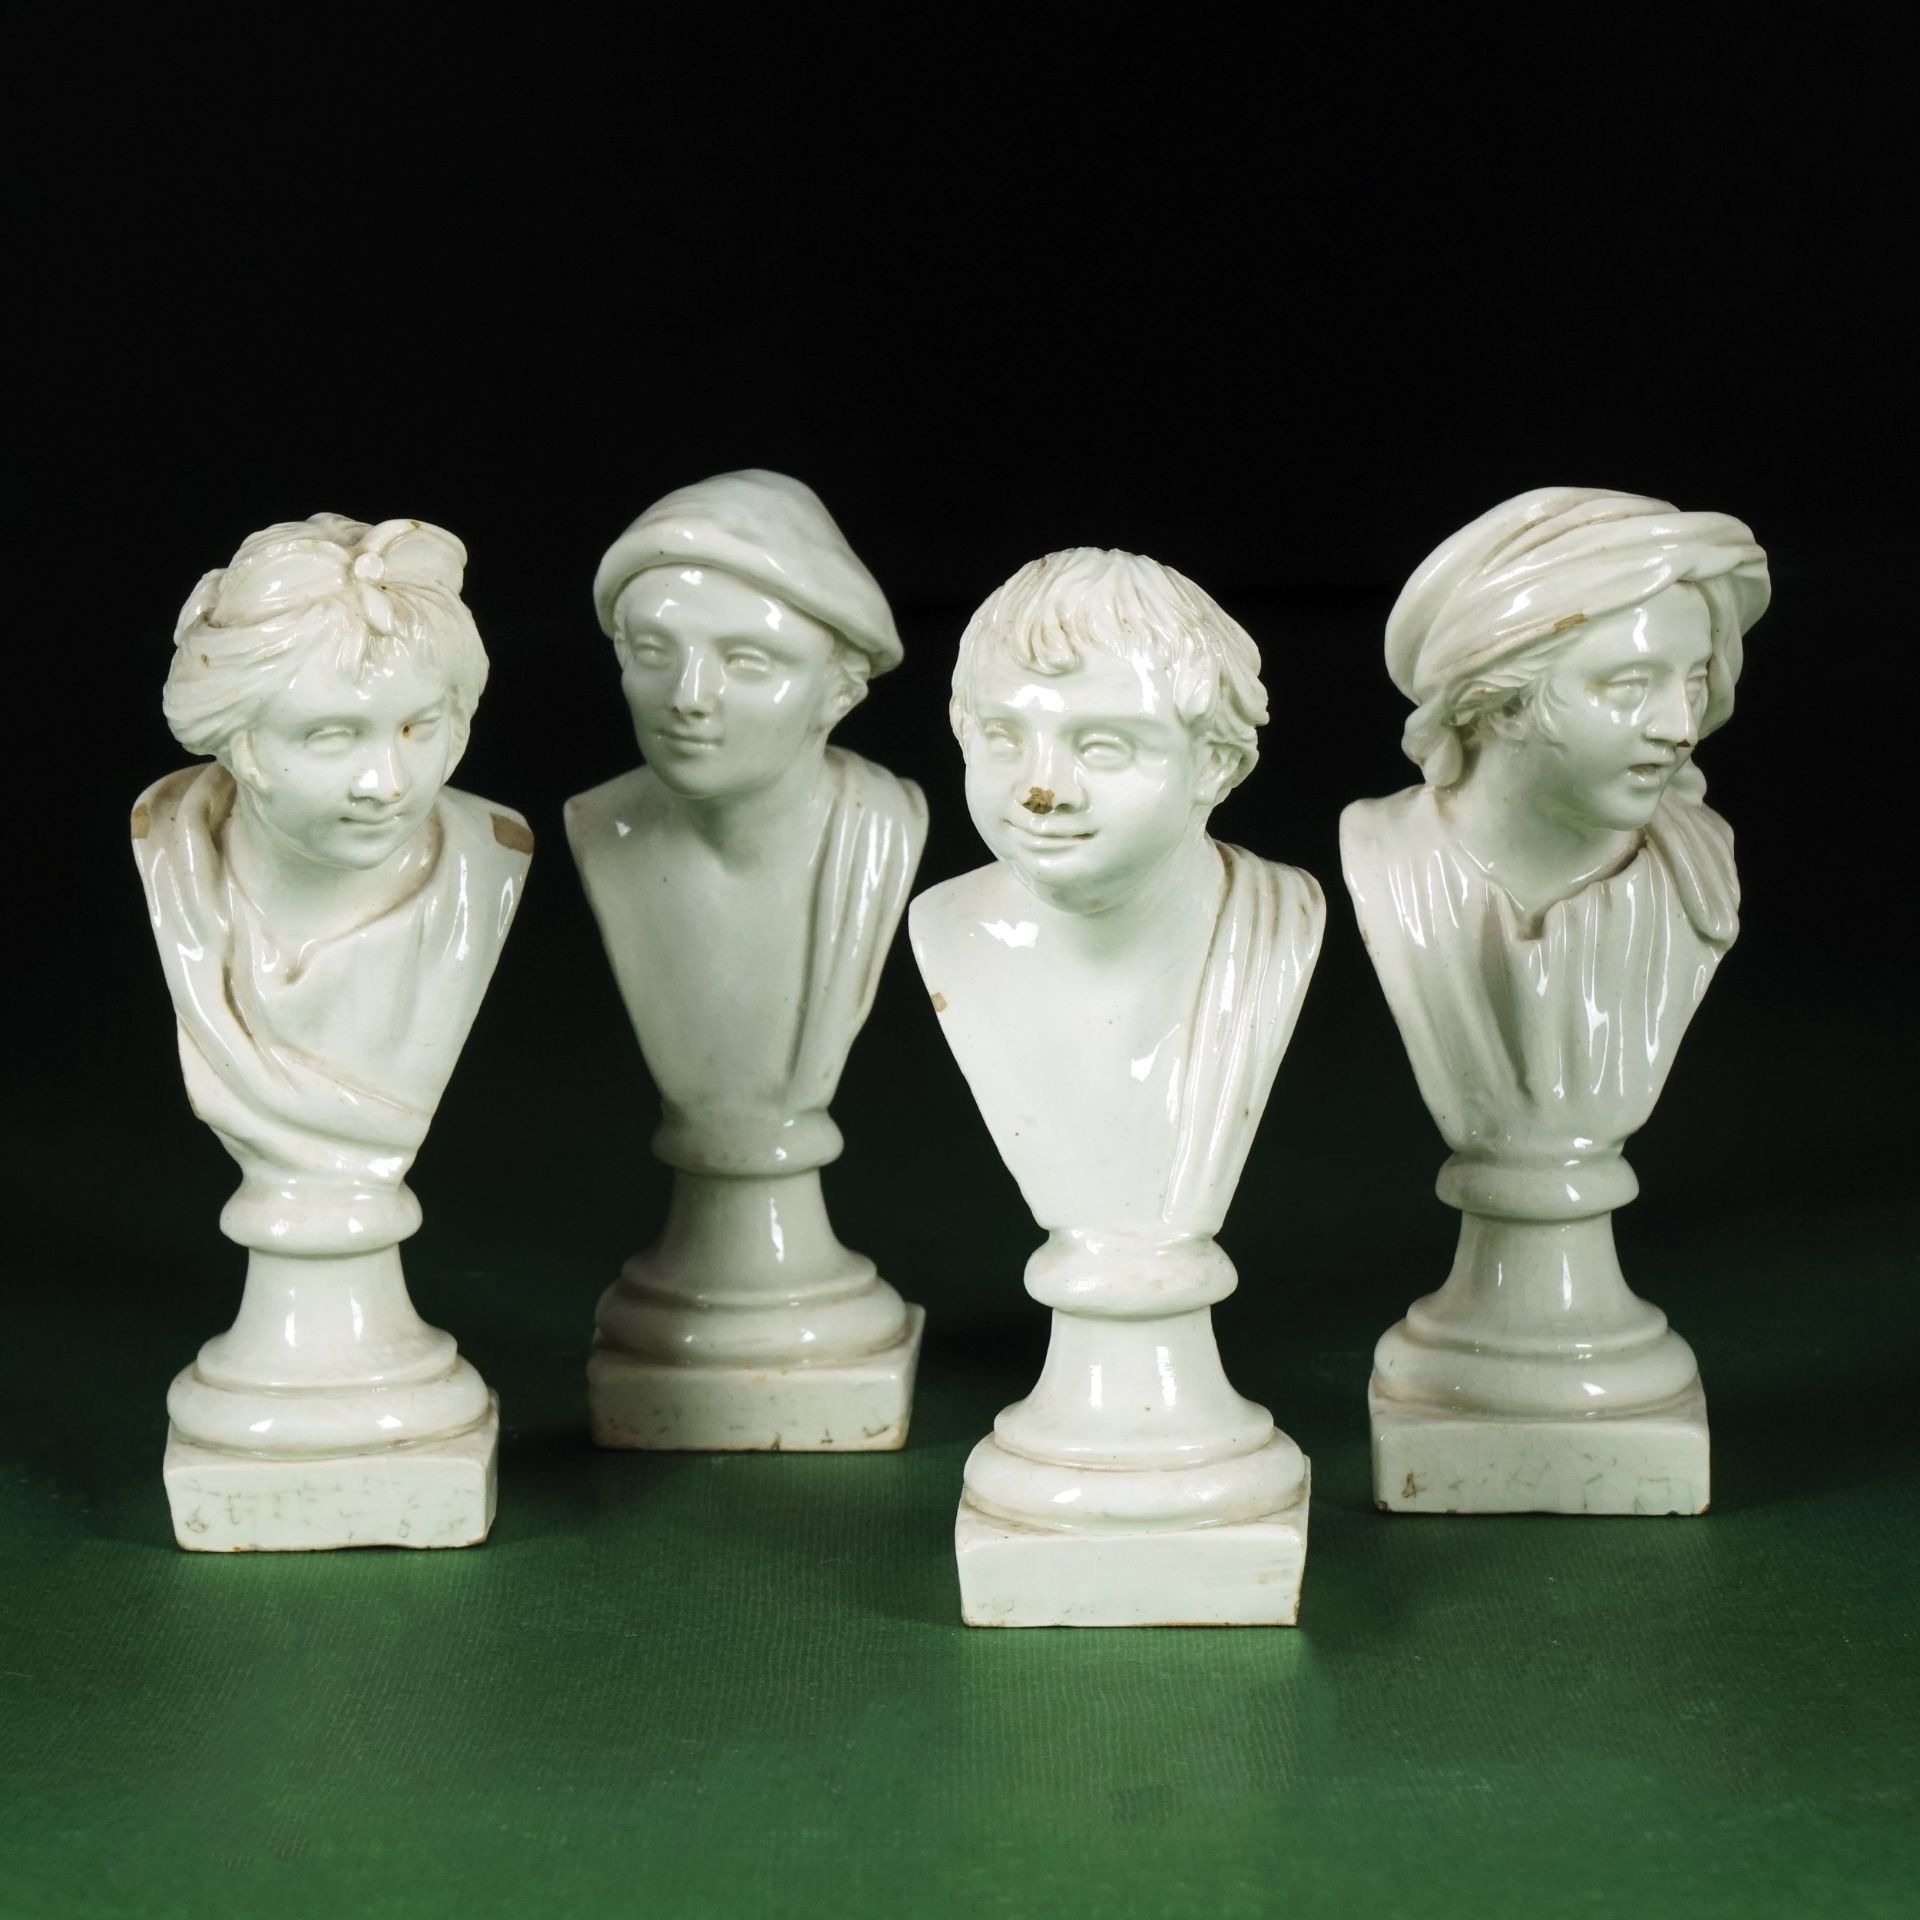 4 Neapolitan white terraglia small busts, 19th century 11cm. high each (one bust with the nose